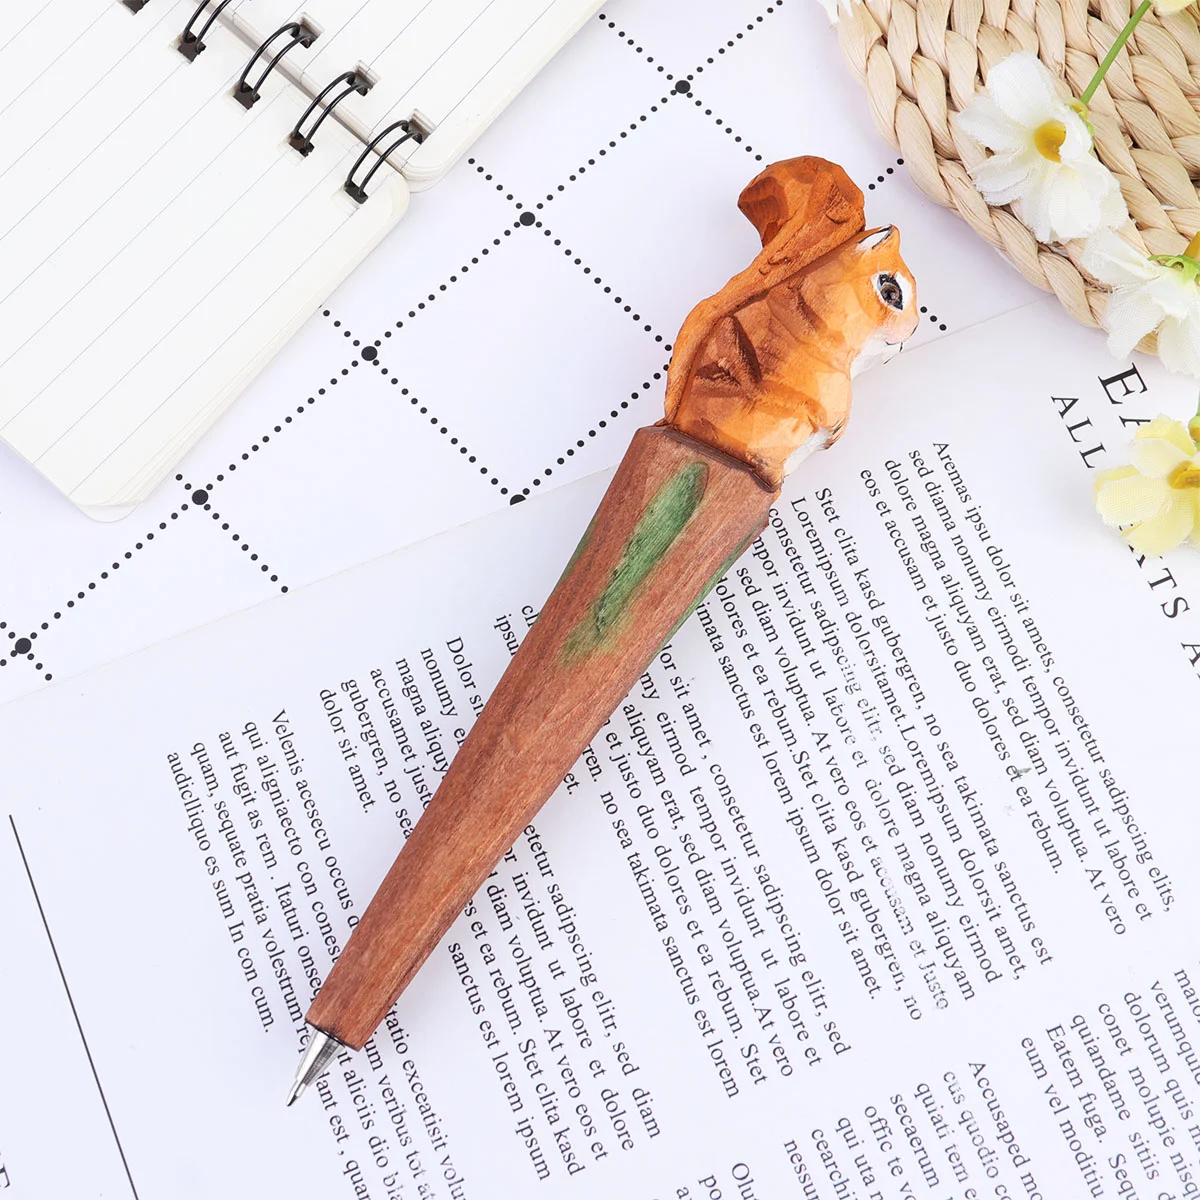 Pure Handmade Wood Carving Animal Pen Creative Wood Carving Squirrel Ballpoint Pen Replaceable Refill Gel Pen for Students for bose 700 qc25 creative live2 akg y50 y50bt earphones replaceable lightning to qc25 upgrade cable